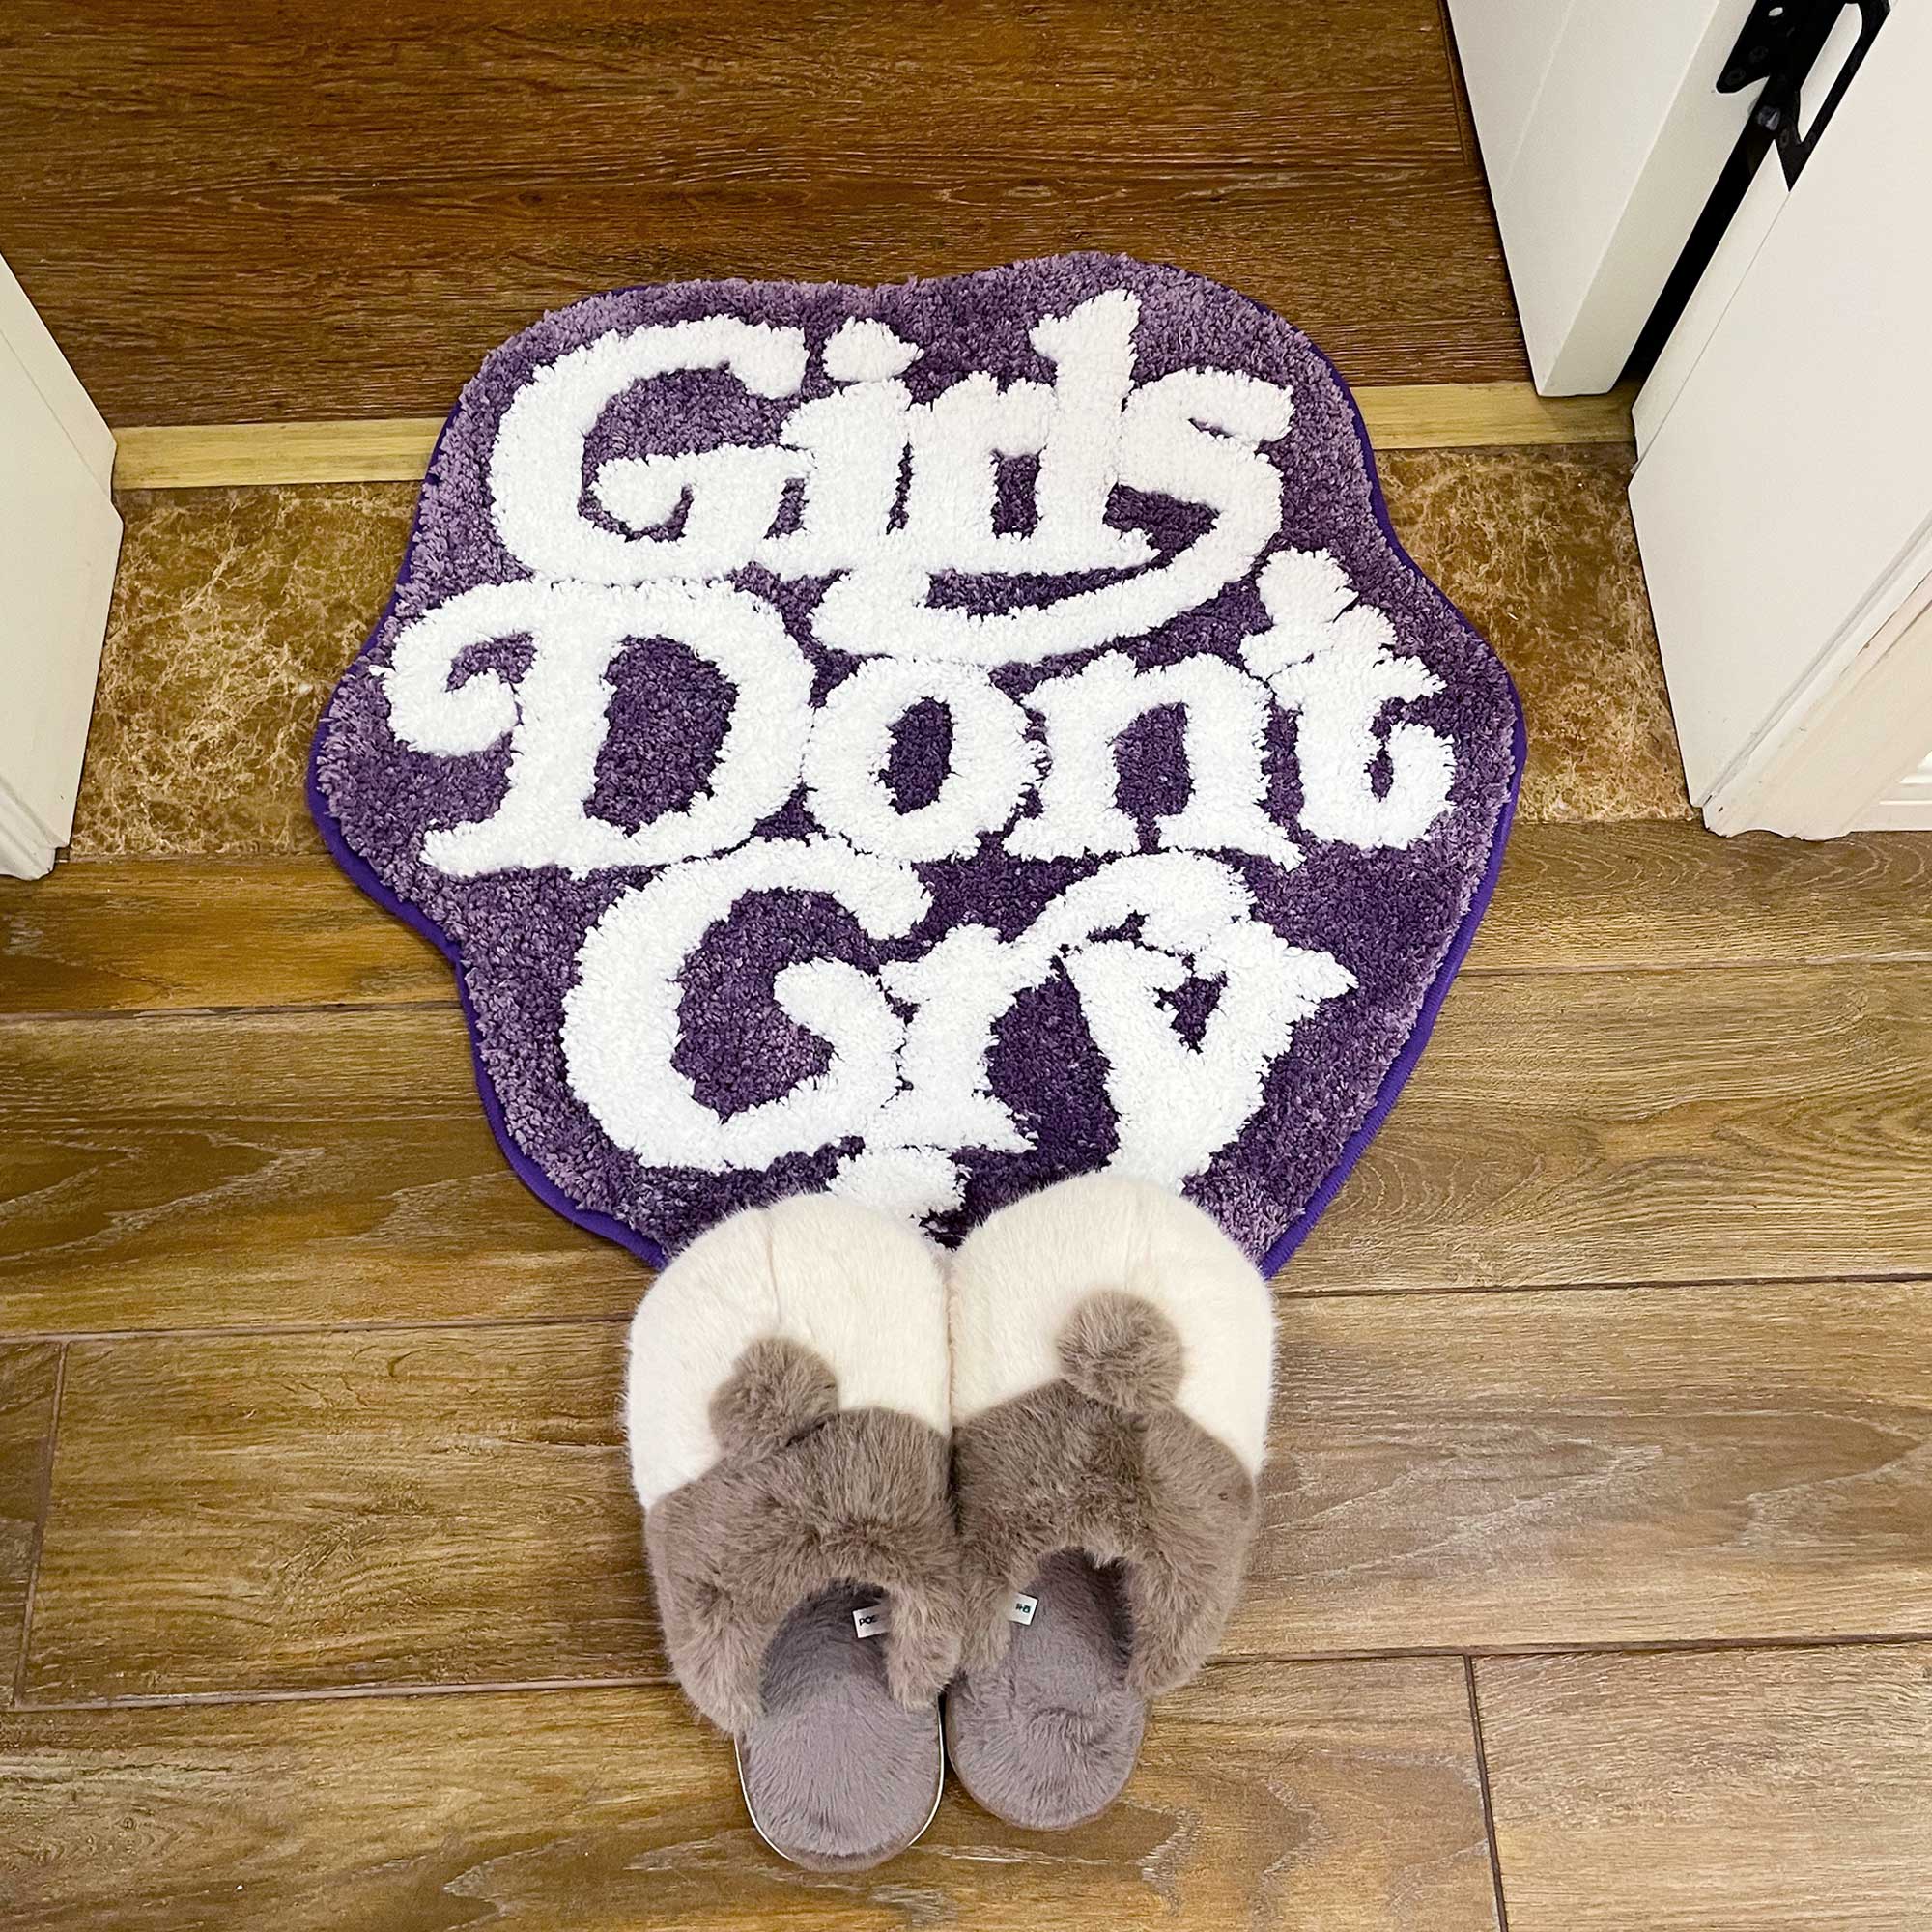 Tufted Girls Don't Cry Rug